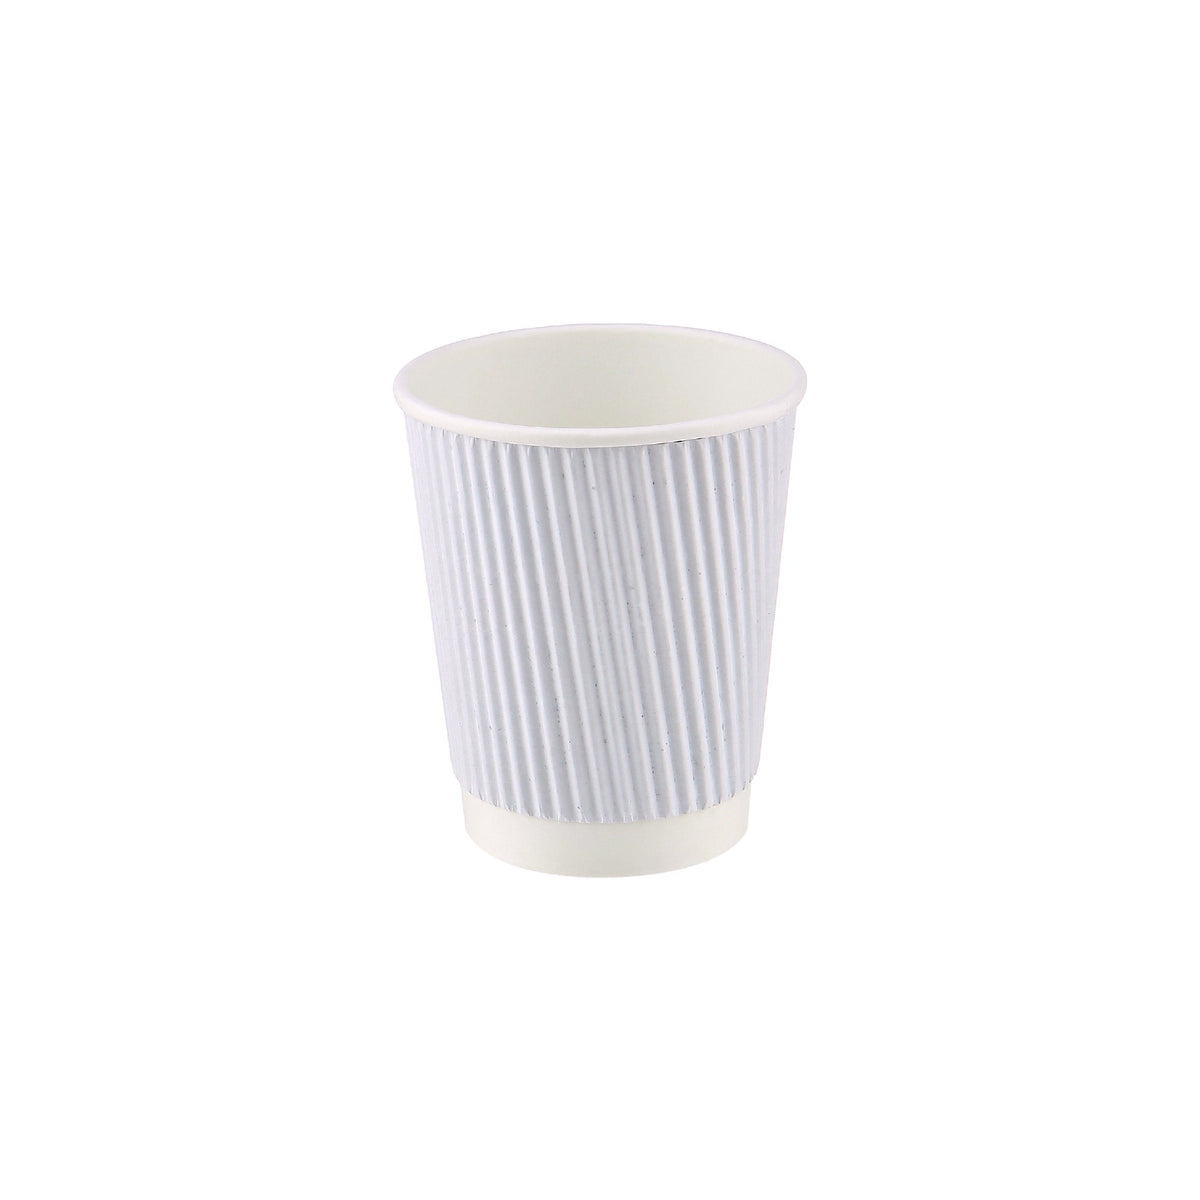 500 Pieces 16 Oz White Ripple Paper Cups